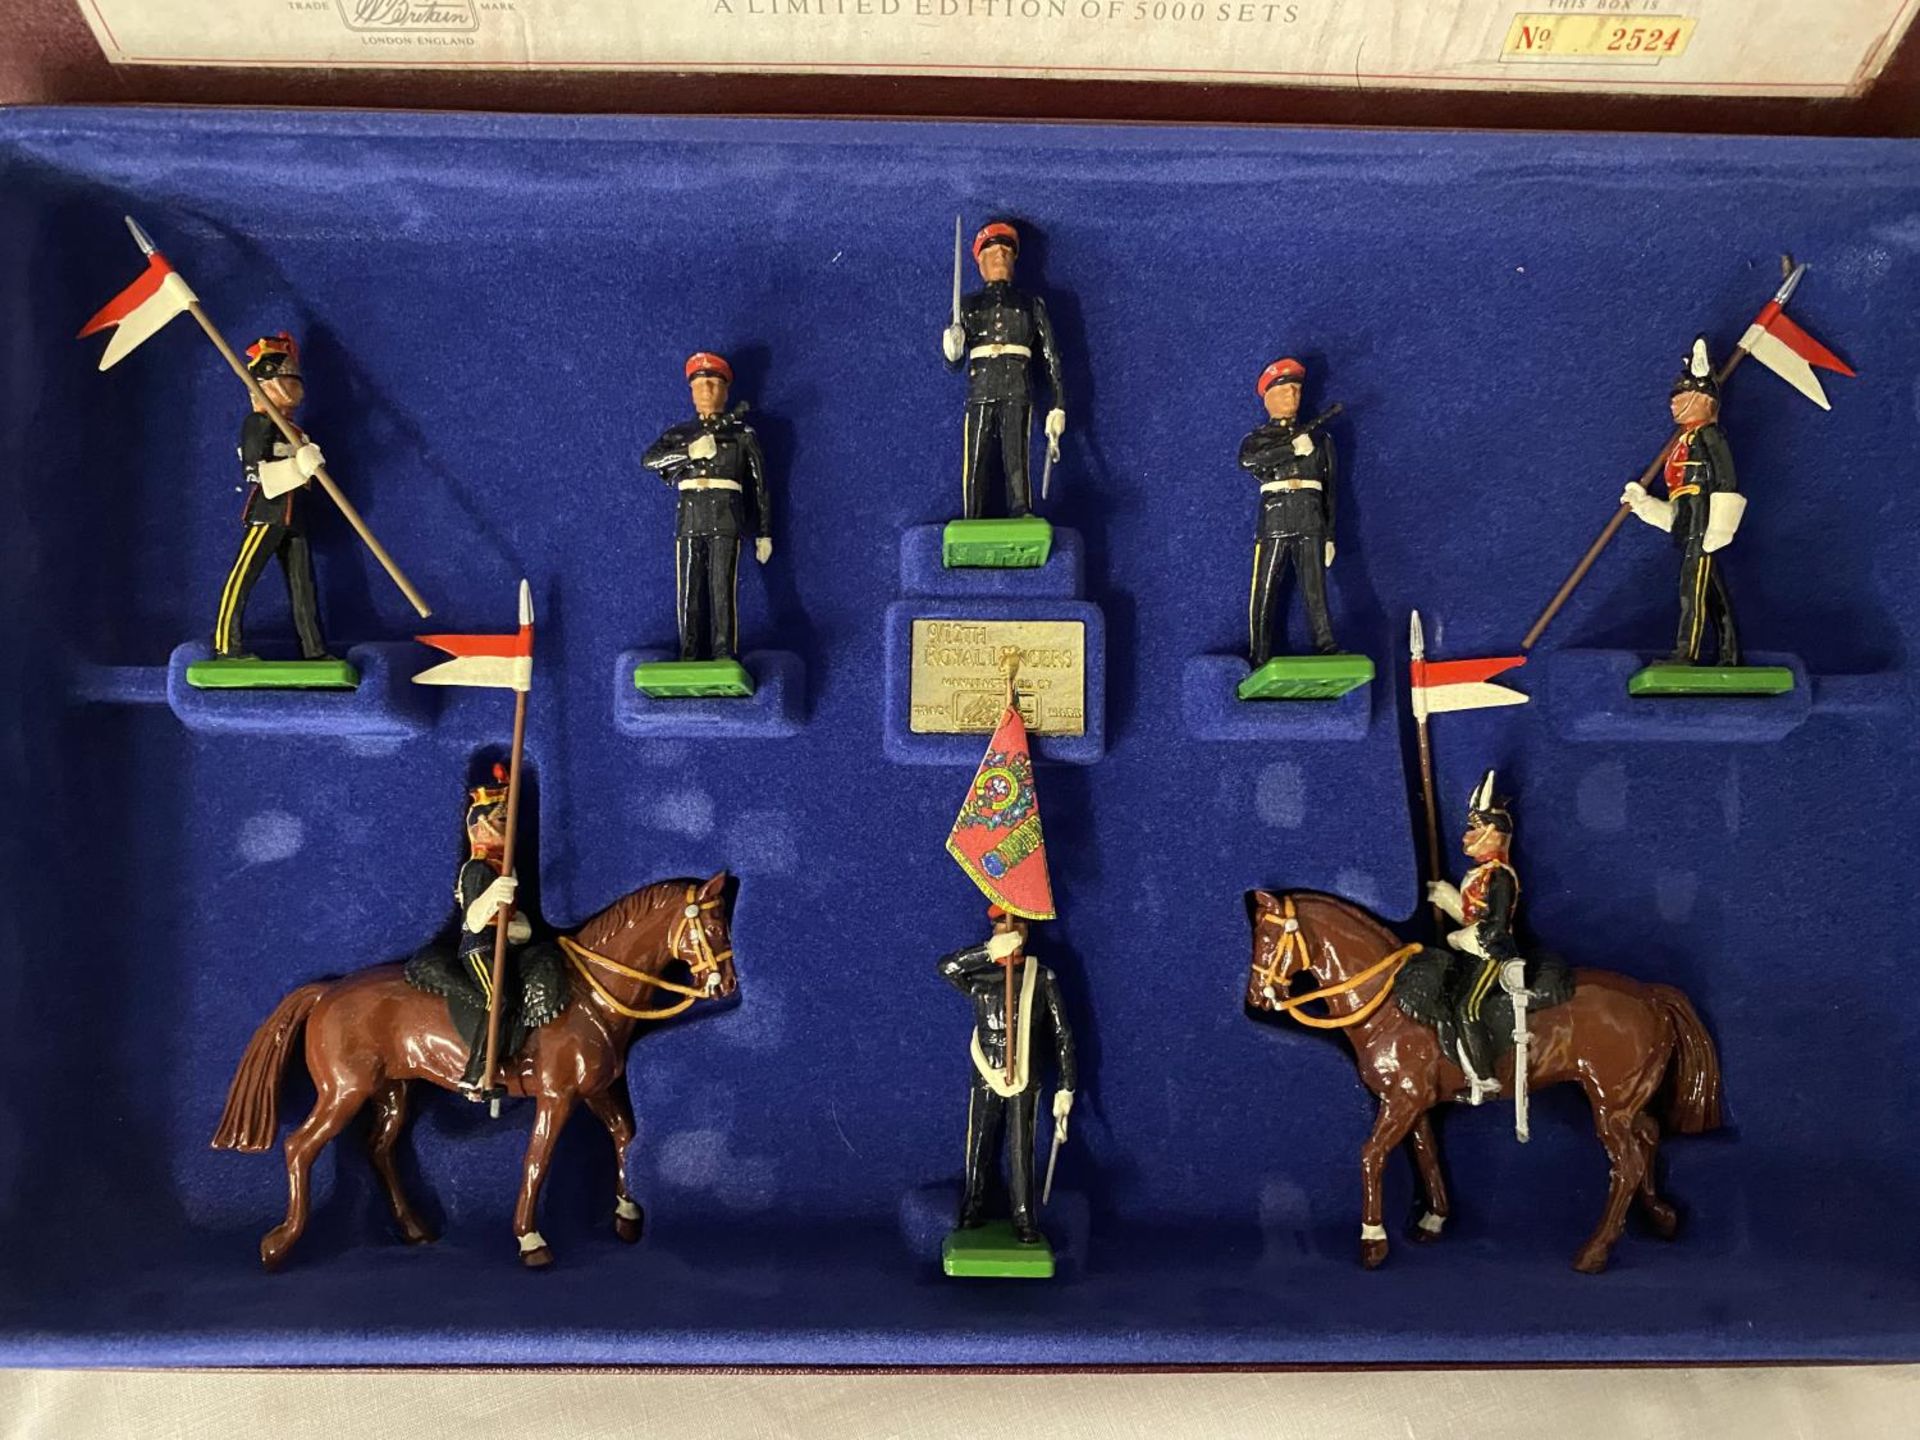 A BOXED BRITIANS THE 9TH/12TH LANCERS TEN PIECE MODEL SOLDIER SET - NUMBER 5392 - LIMITED EDITION - Image 2 of 6